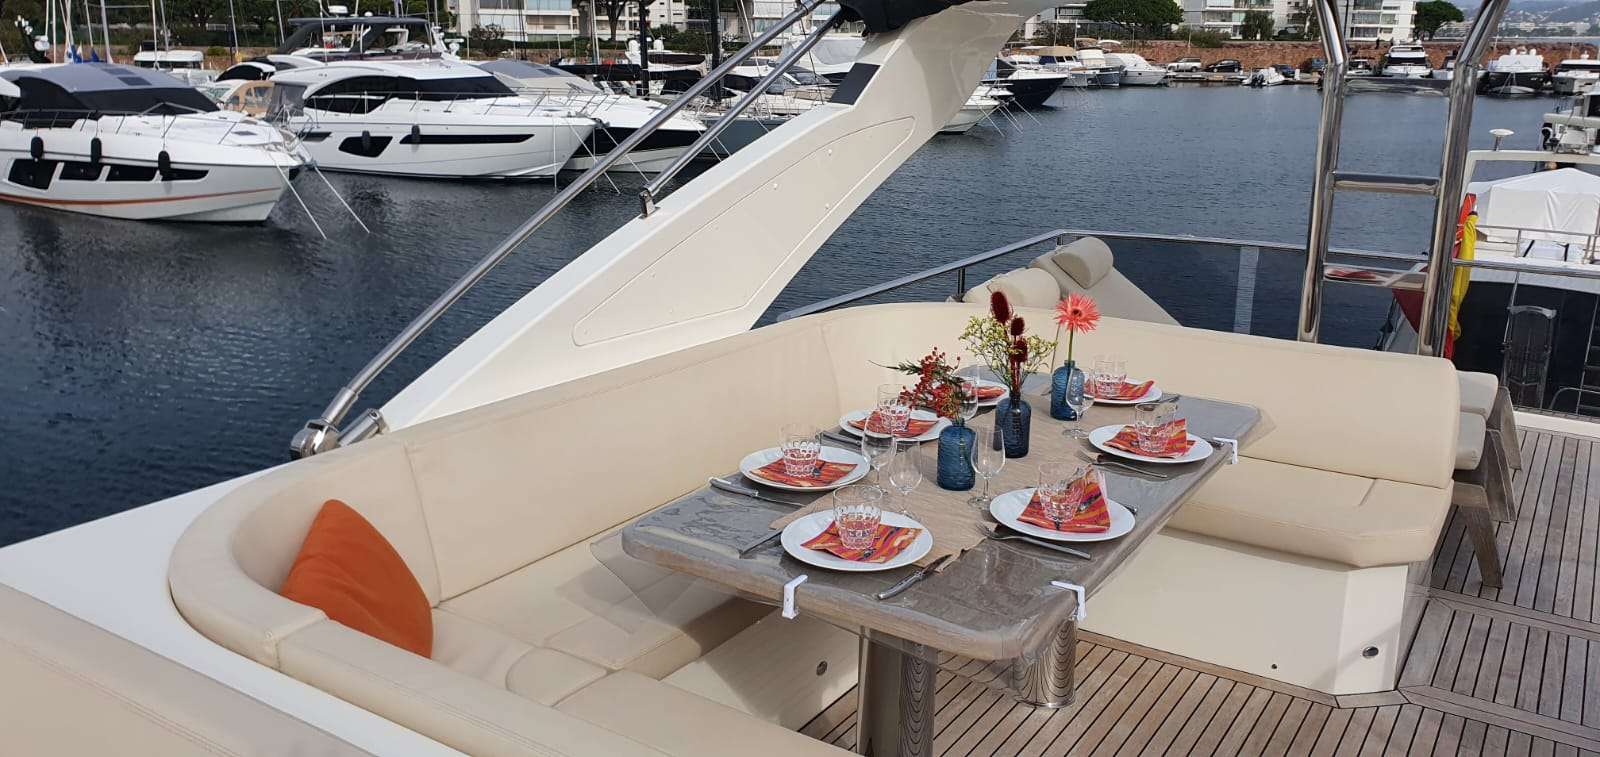 ABSOLUTE - Yacht Charter Bormes-les-Mimosas & Boat hire in Fr. Riviera, Corsica & Sardinia 3